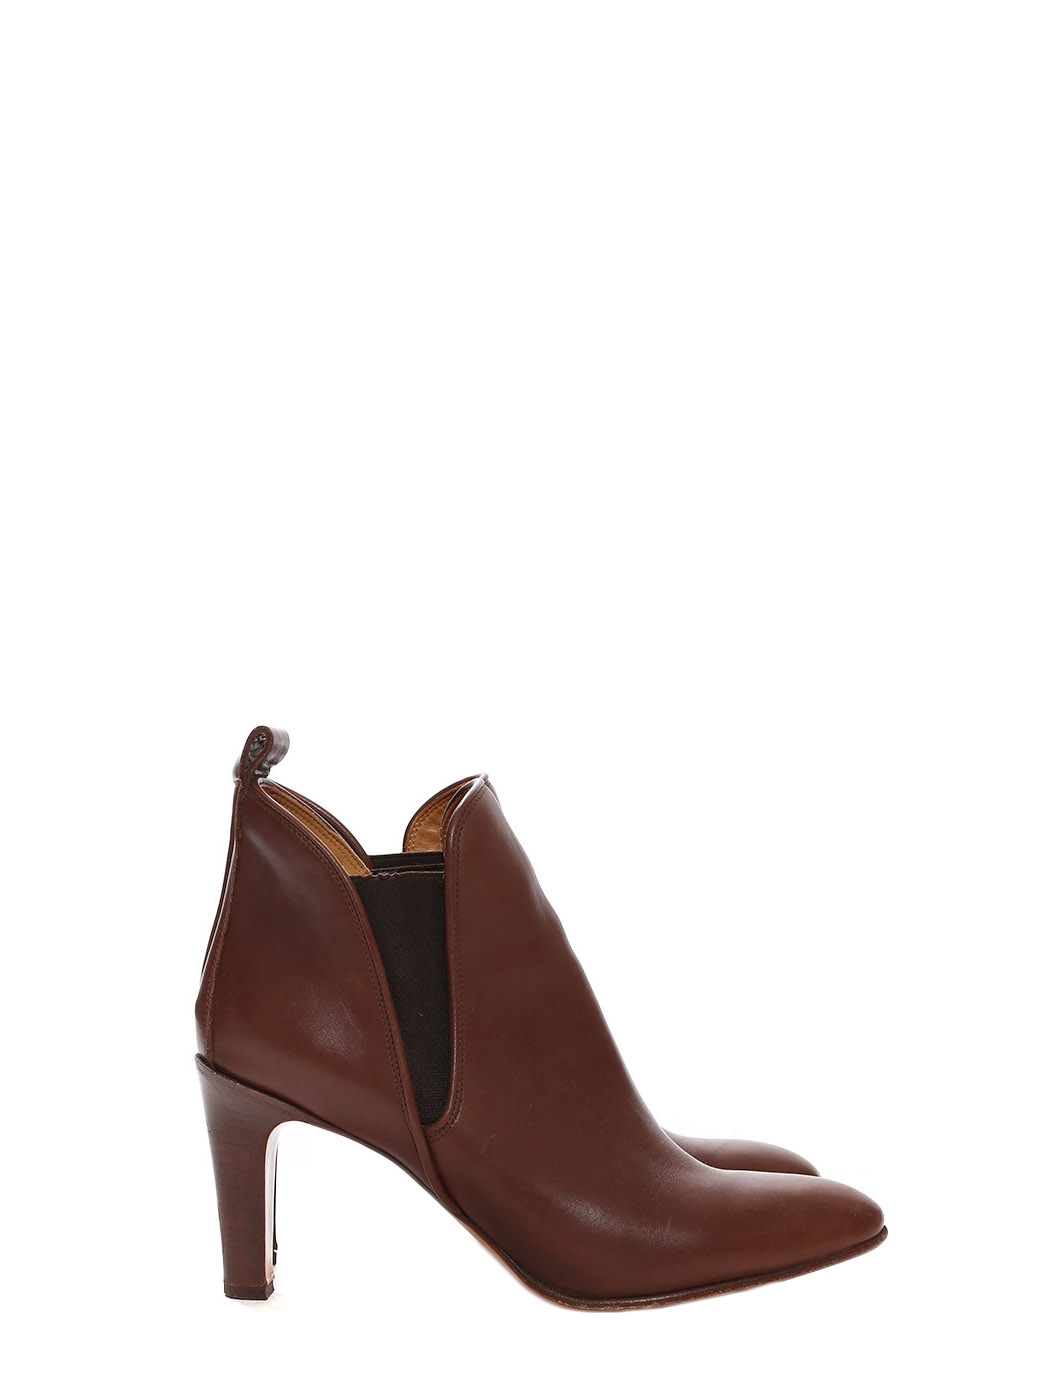 encounter Pogo stick jump tool Boutique CHLOE PIPER dark brown leather heel ankle boots Retail price €640  Size 39.5